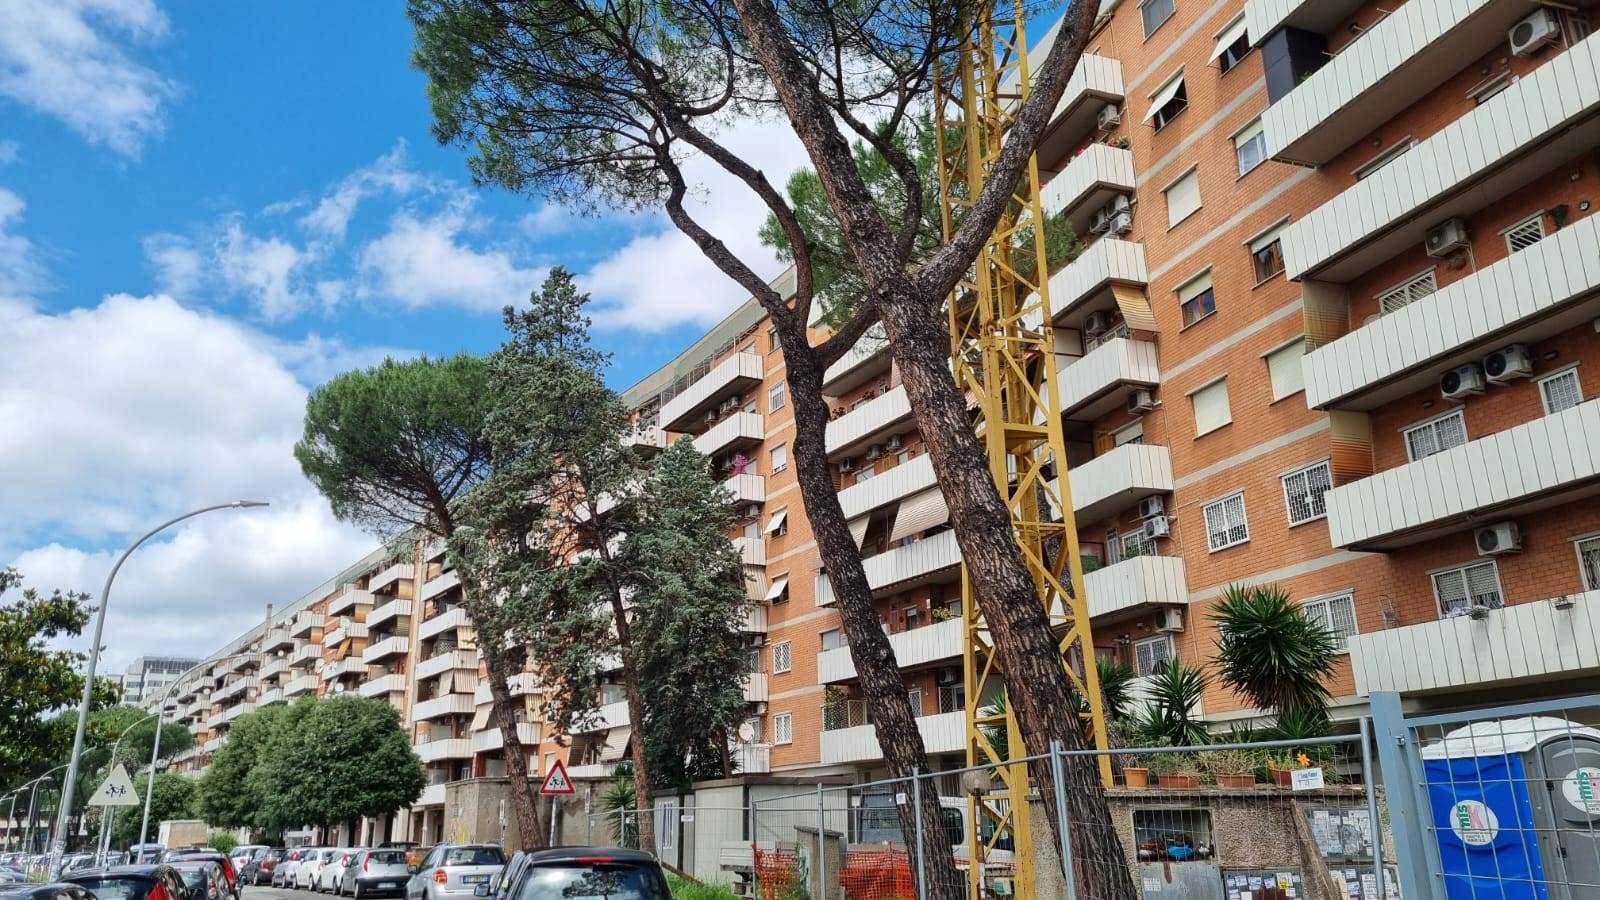 CINECITTÀ, ROMA, Apartment for sale of 100 Sq. mt., Good condition, Heating Individual heating system, Energetic class: G, Epi: 175 kwh/m2 year, 